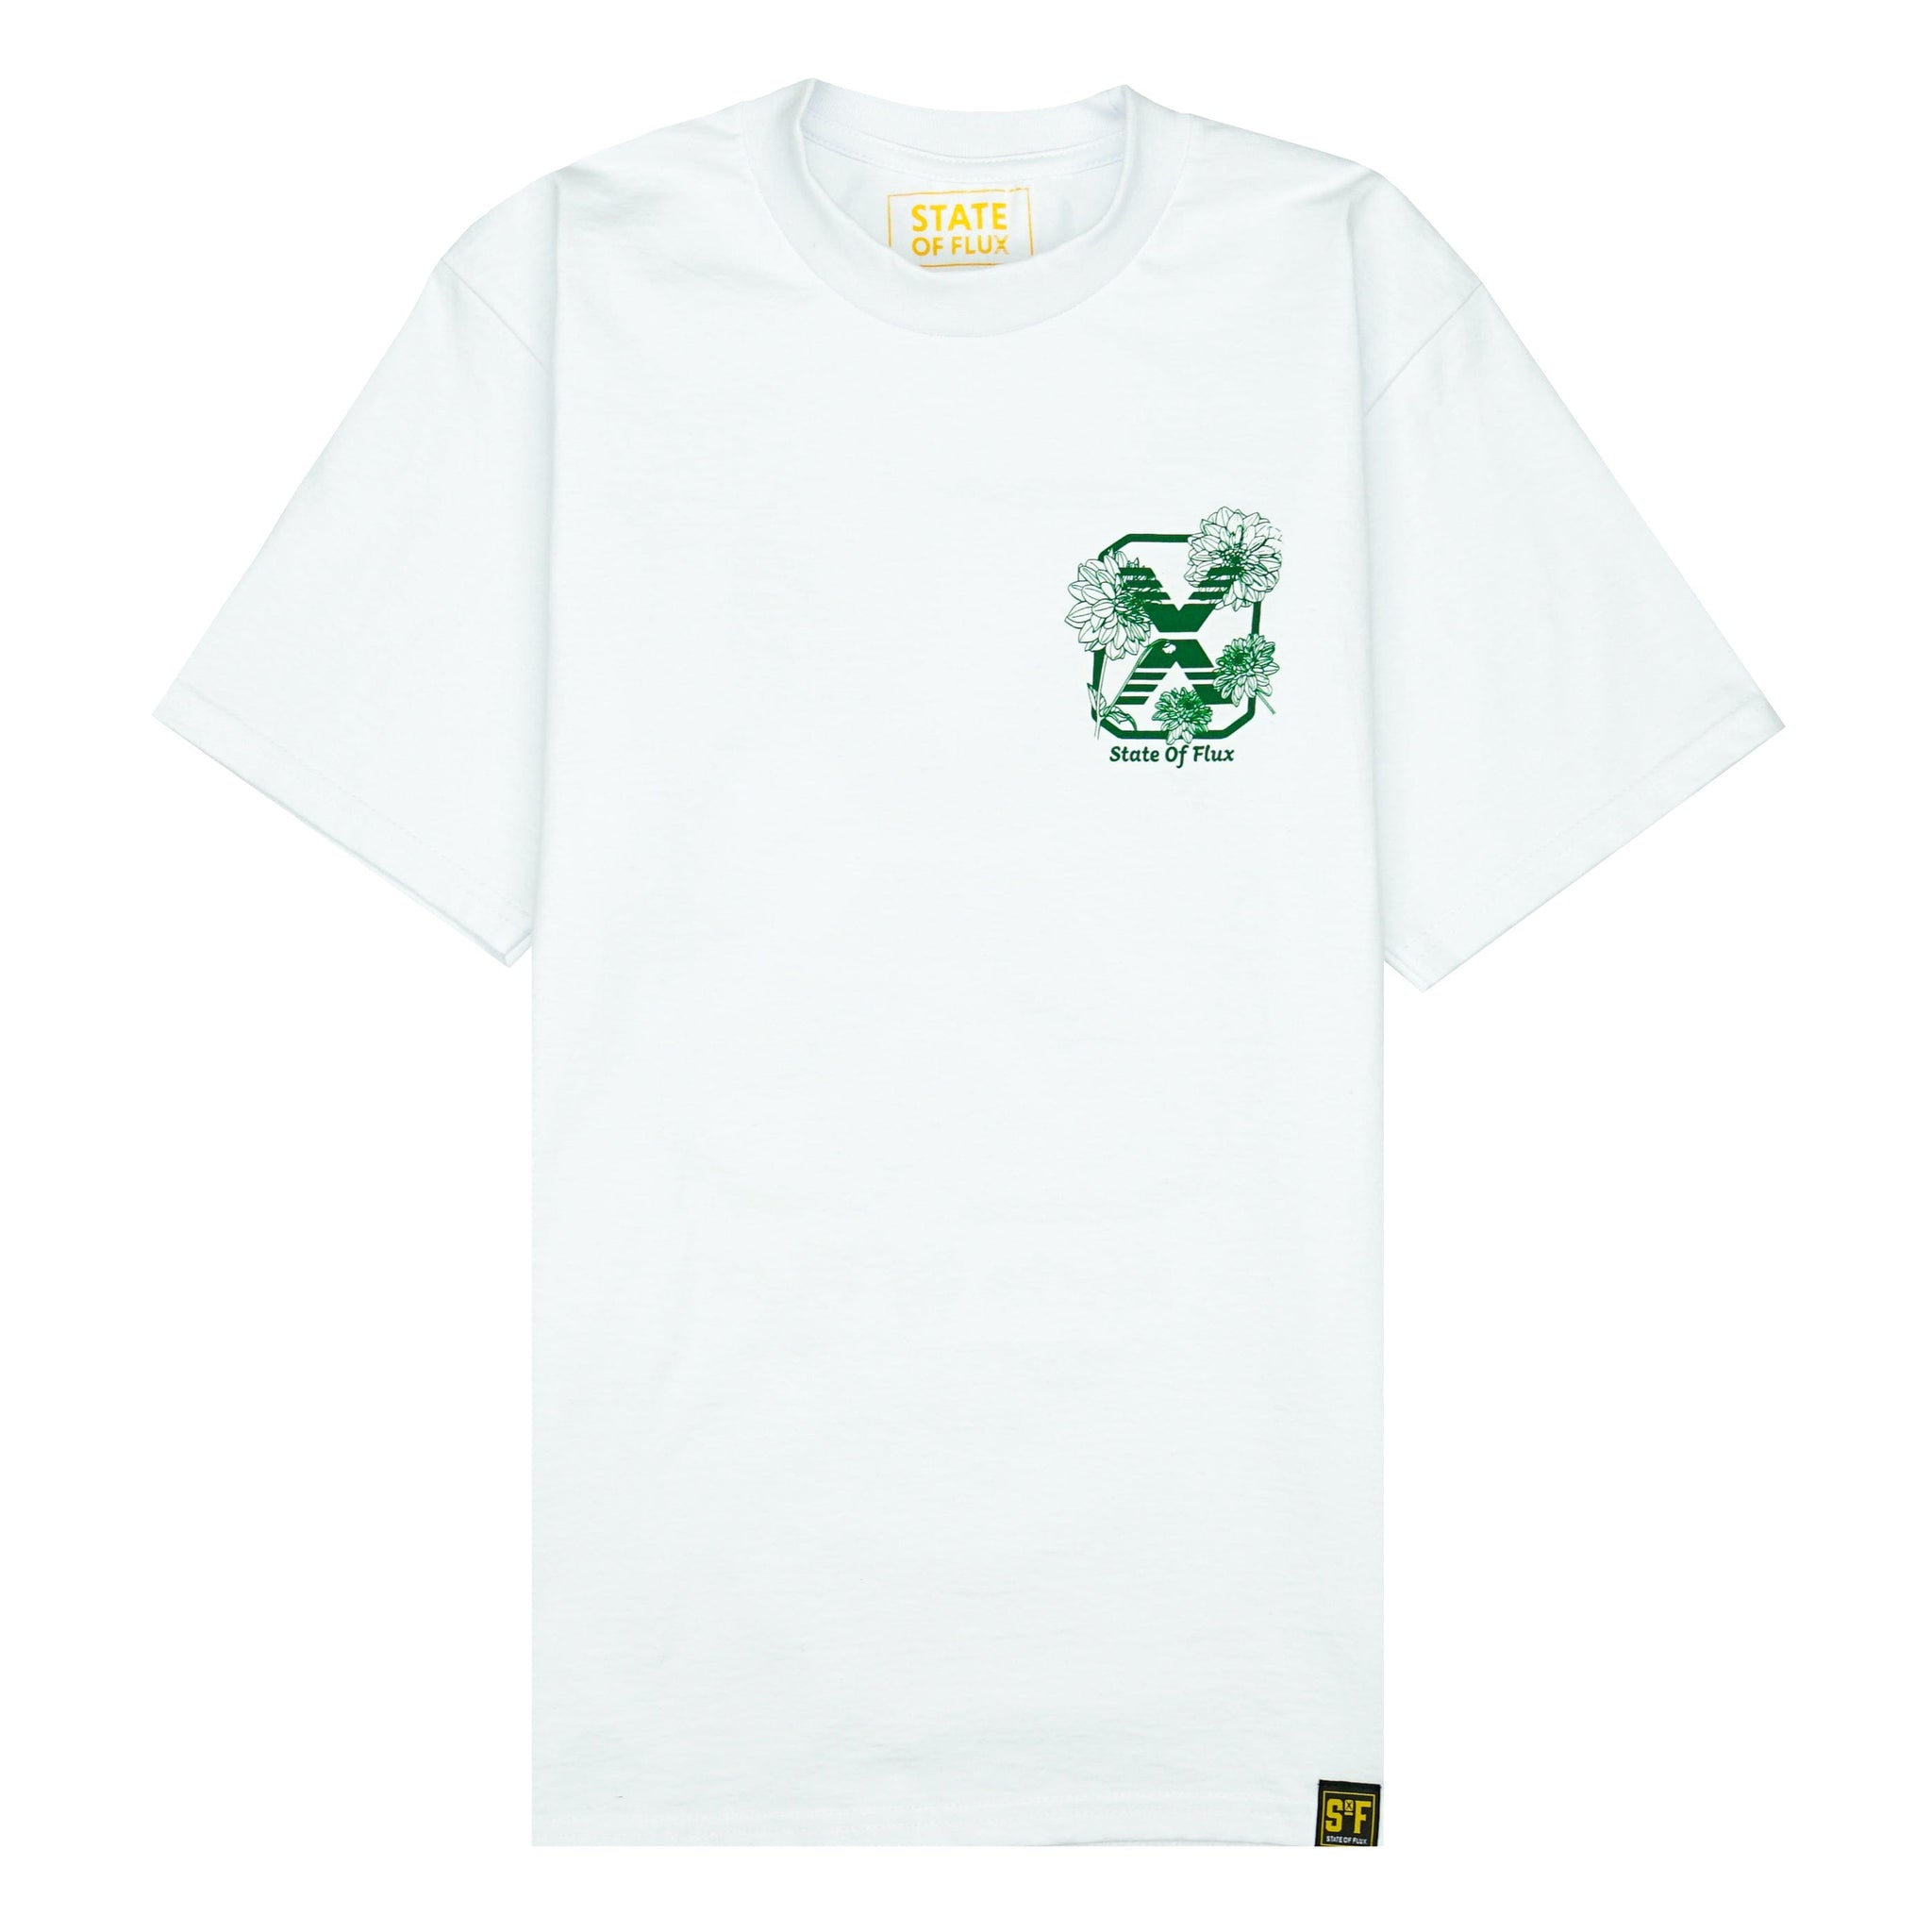 Bloom Therapy Tee in white